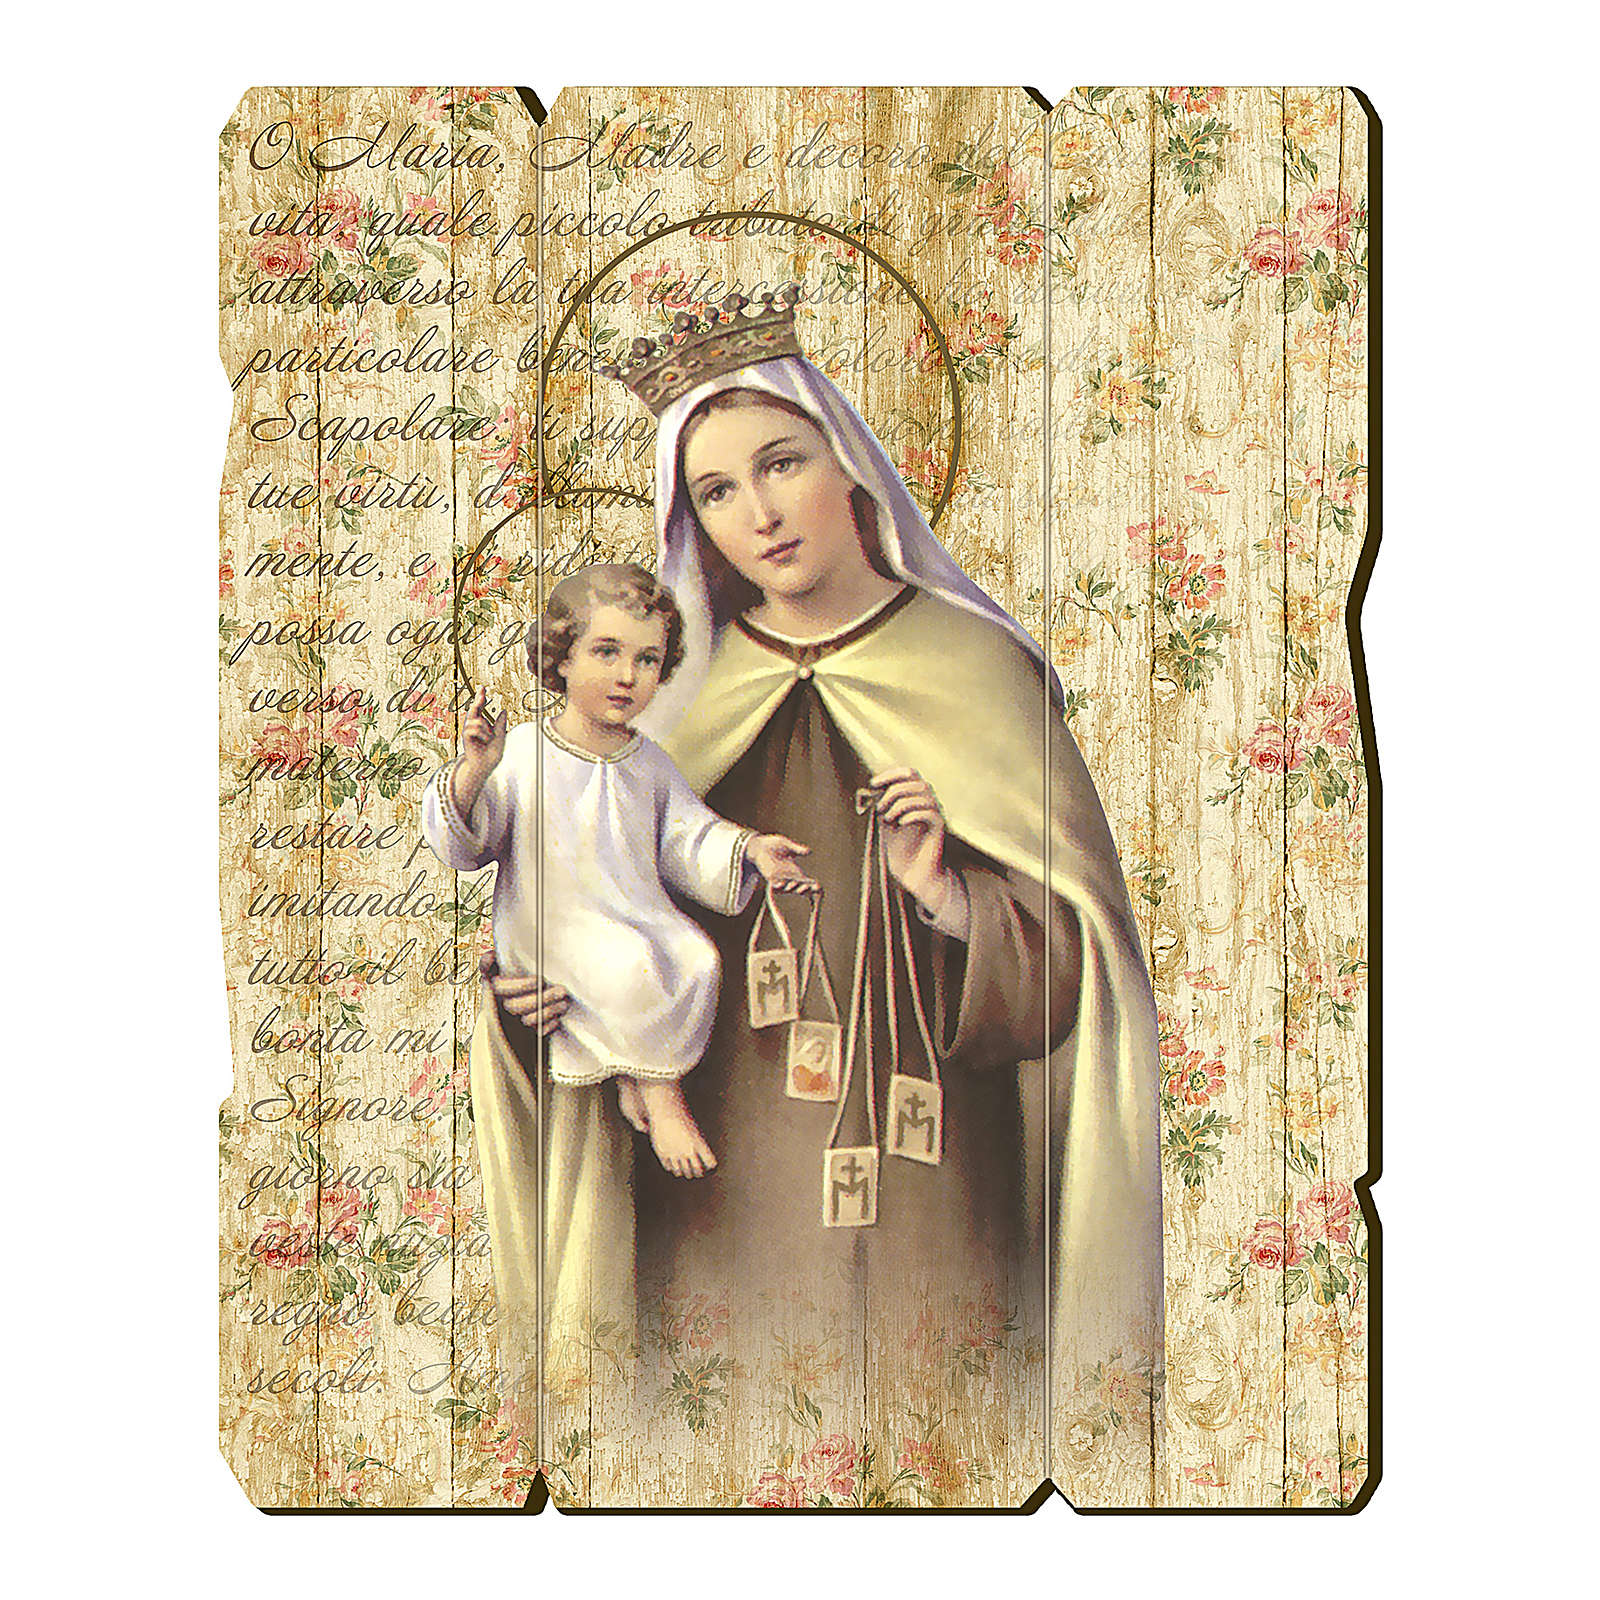 Our Lady of Mount Carmel painting on wood with hook. online sales on HOLYART.com